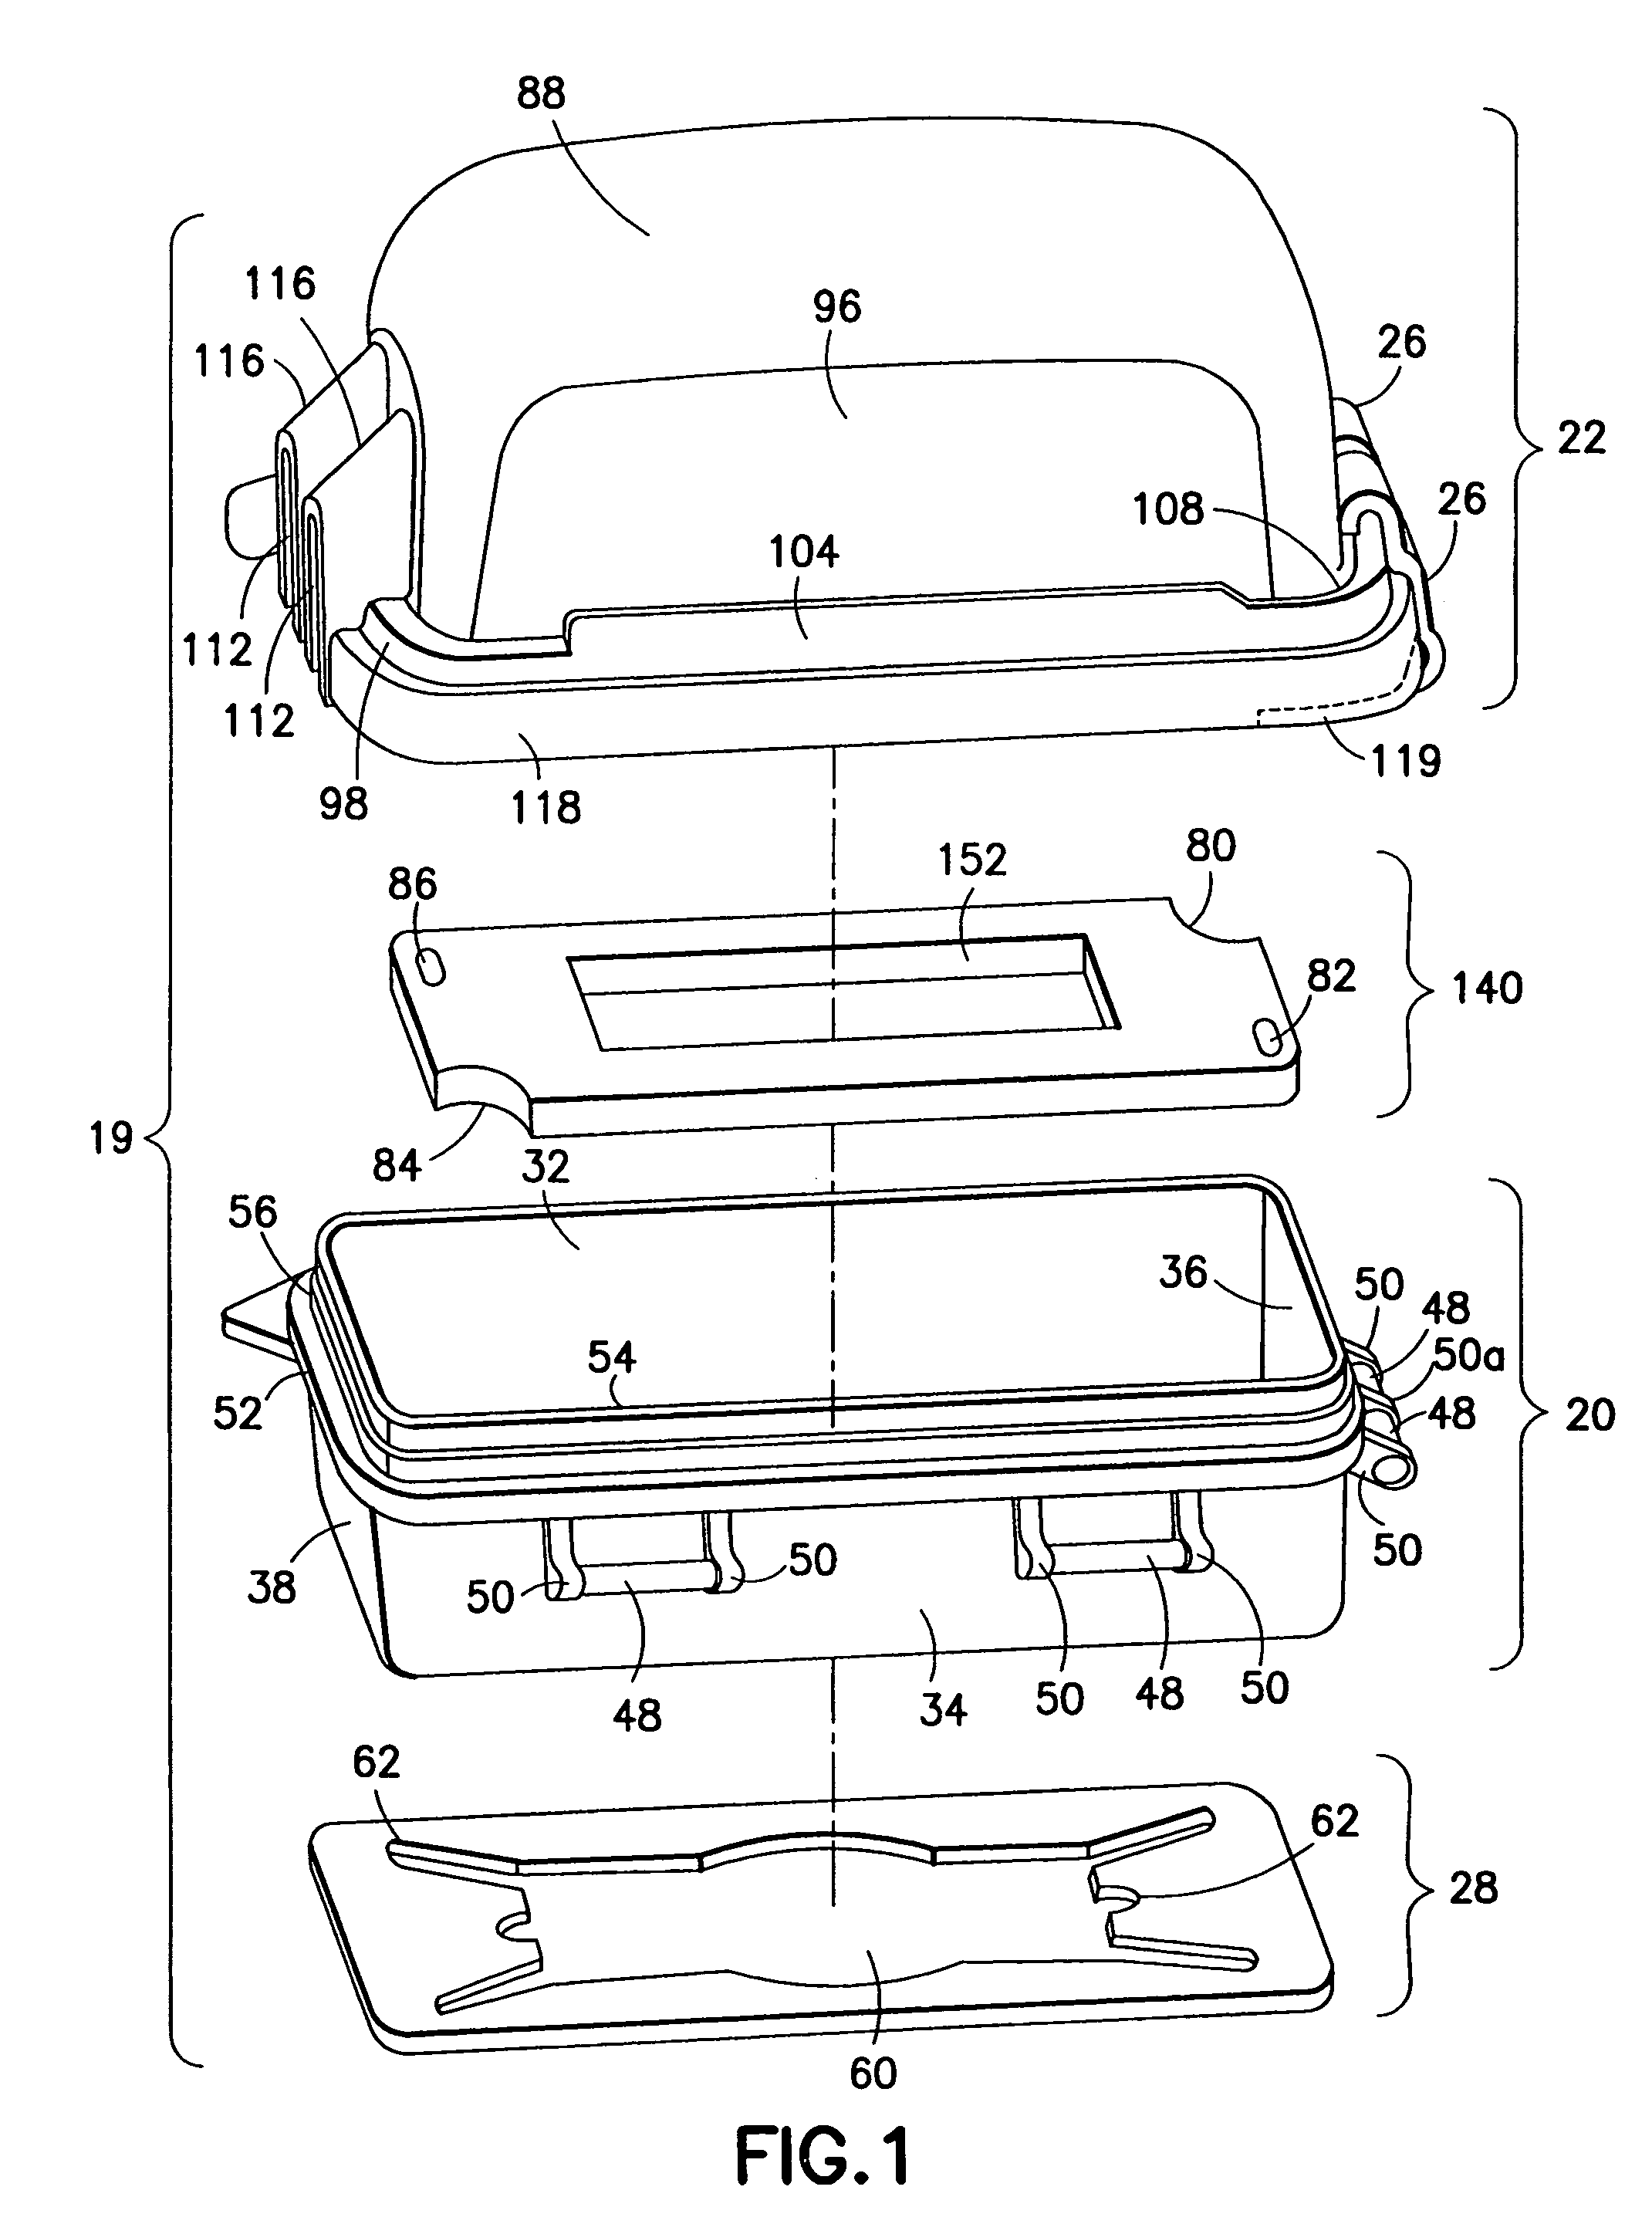 Weatherproof electrical enclosure having an adjustable-position cover